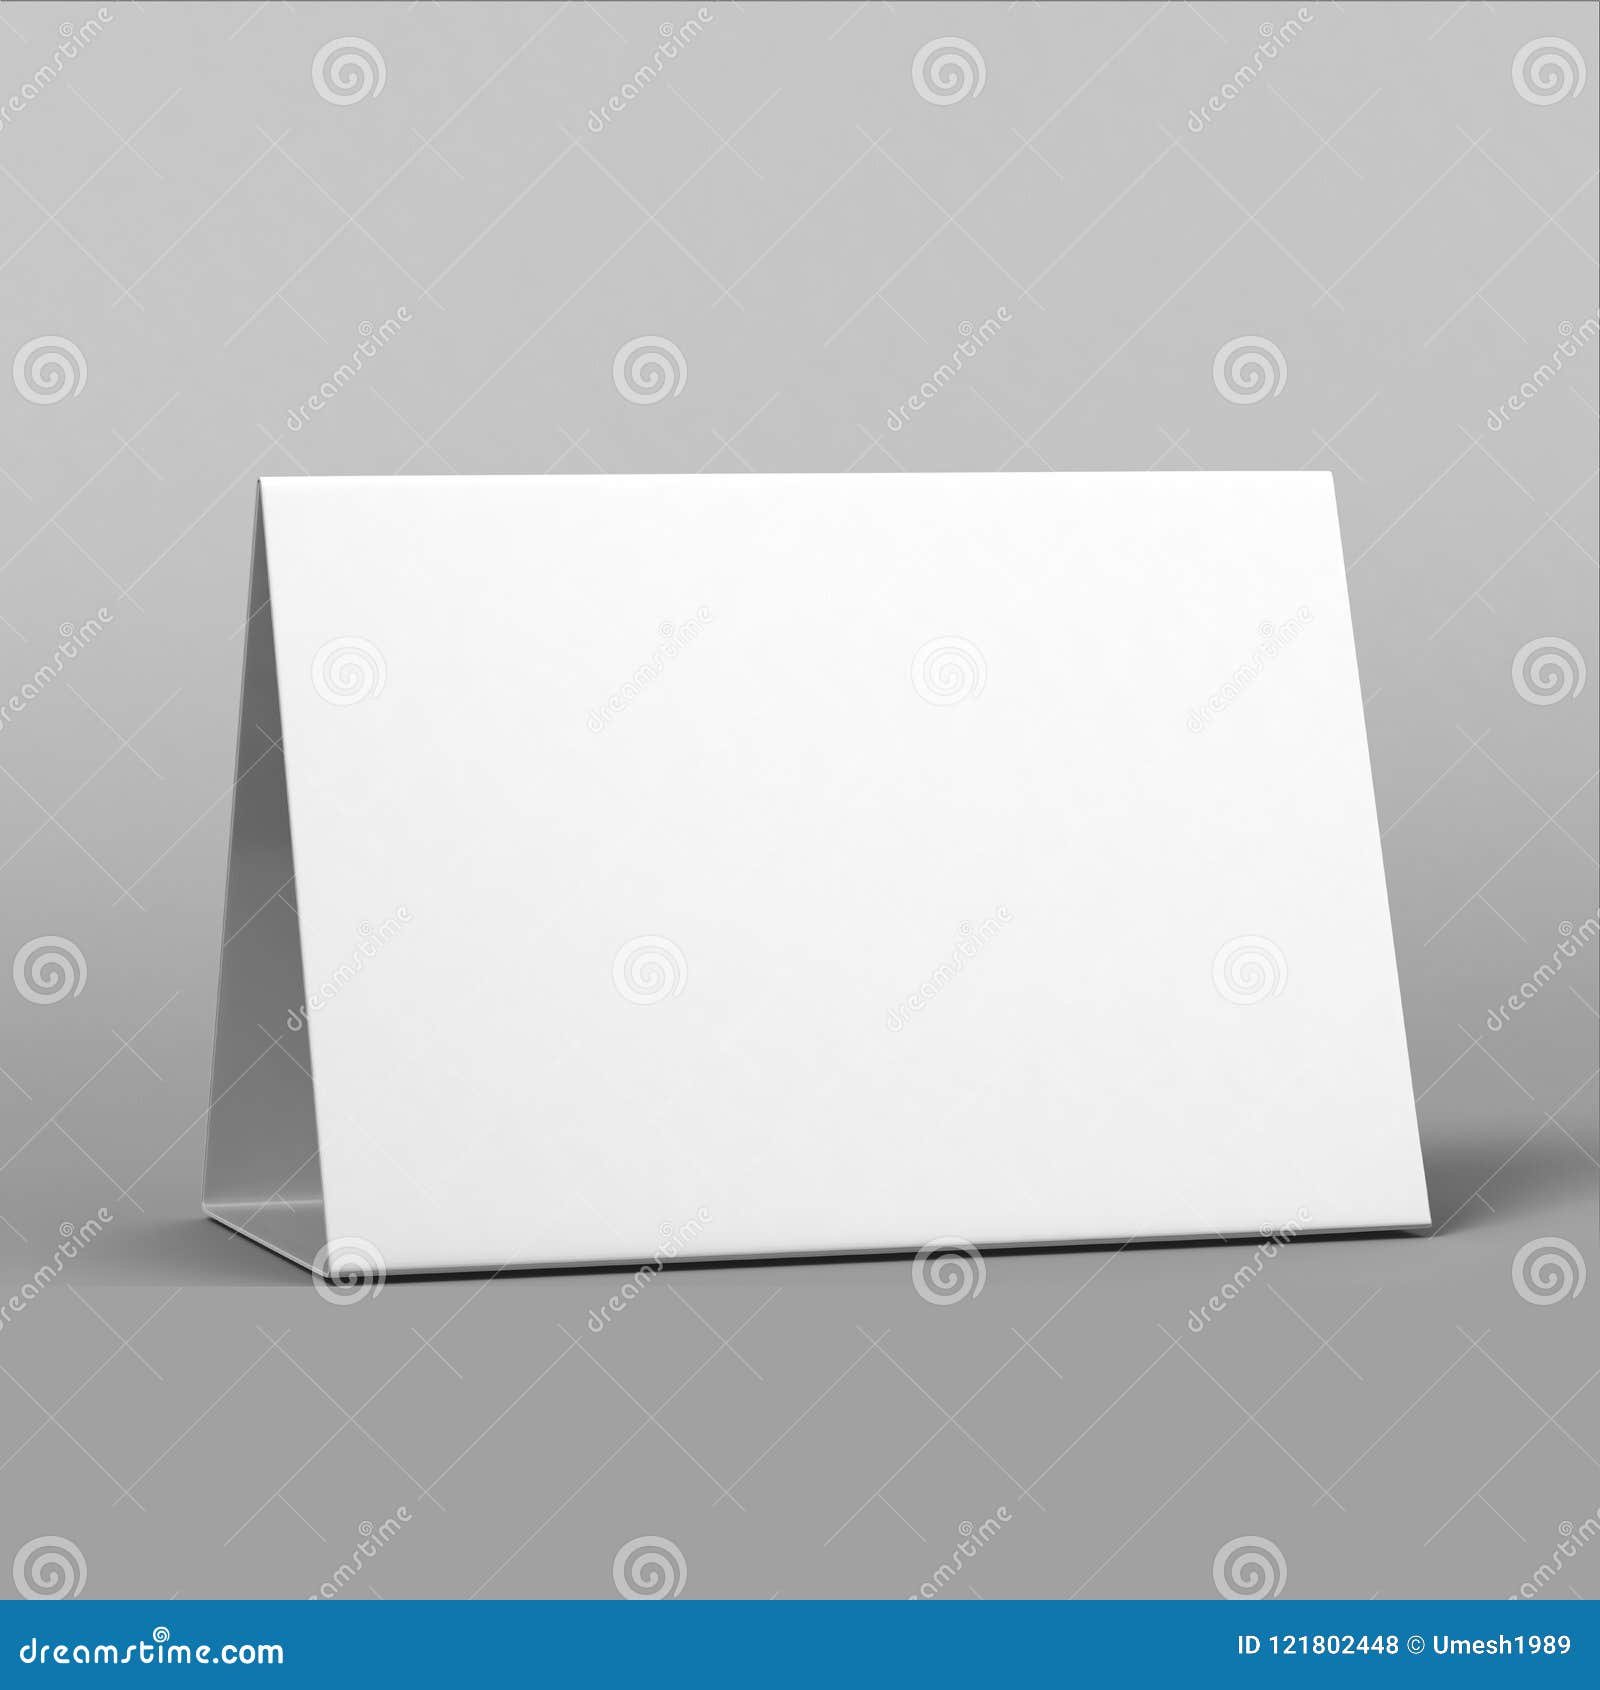 Tablet Tent Talkers Promotional Menu Cards White Blank Empty For For Blank Tent Card Template